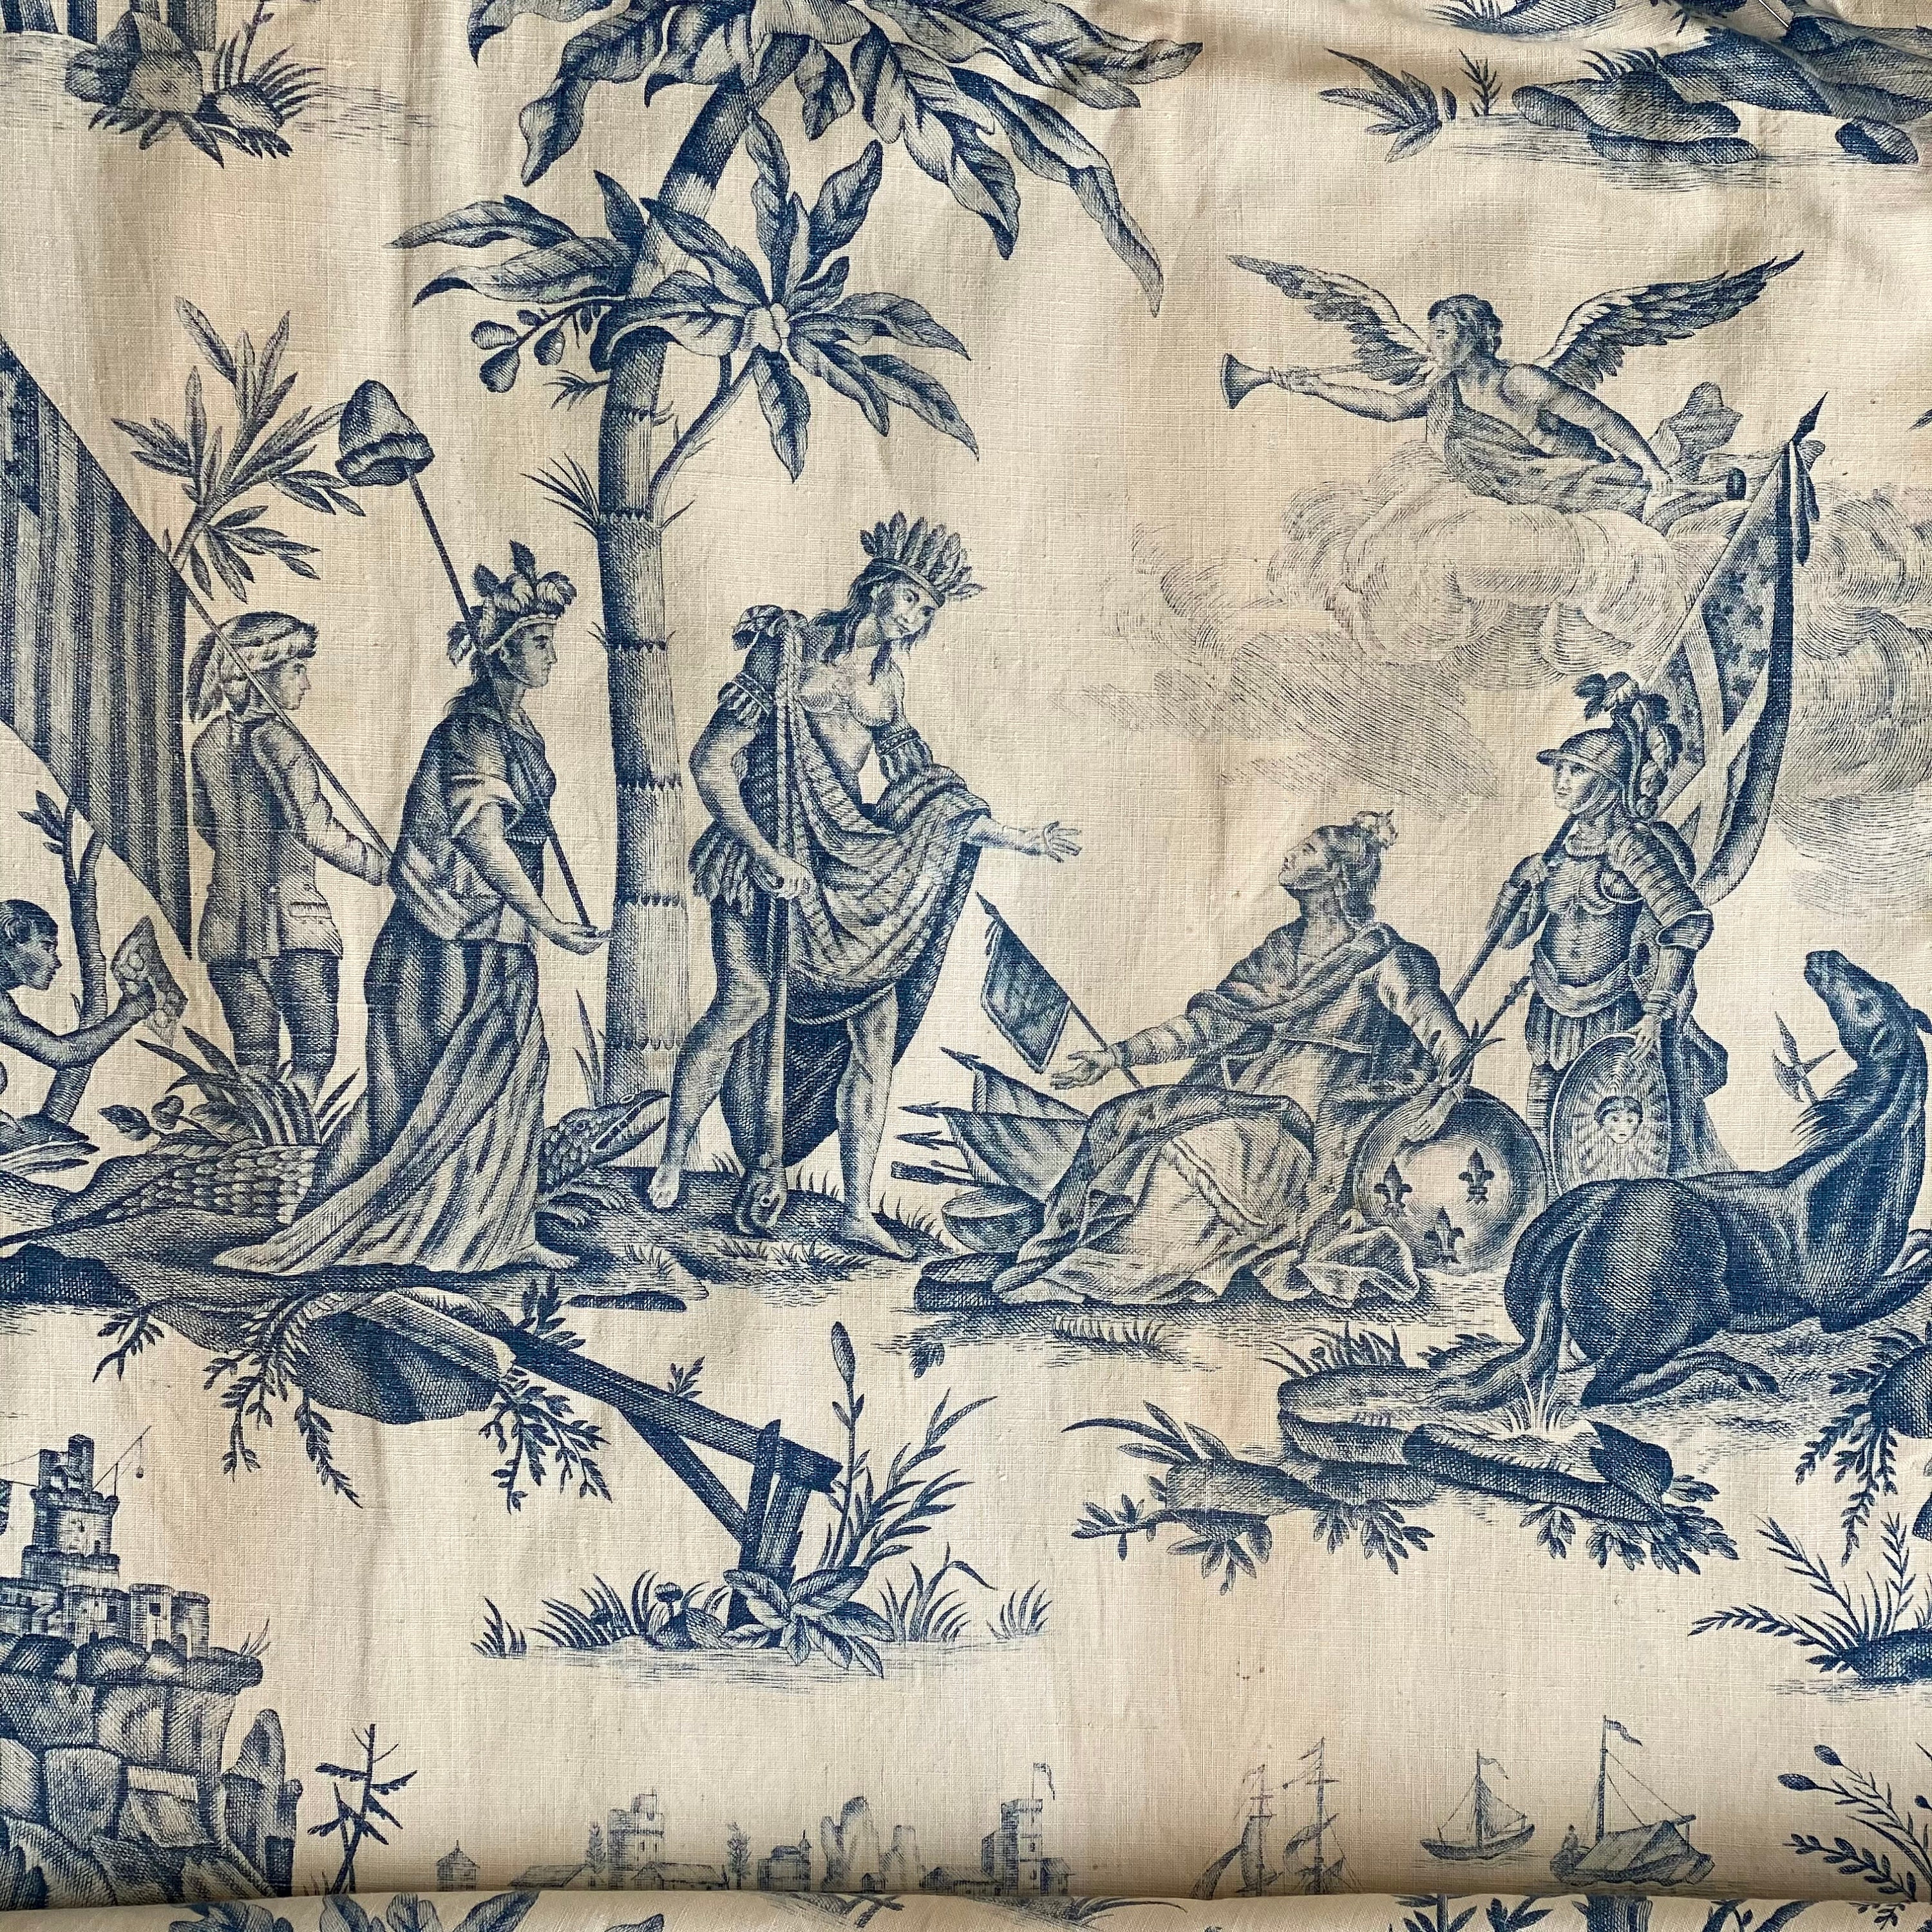 Made in France: La Toile de Jouy - France Today